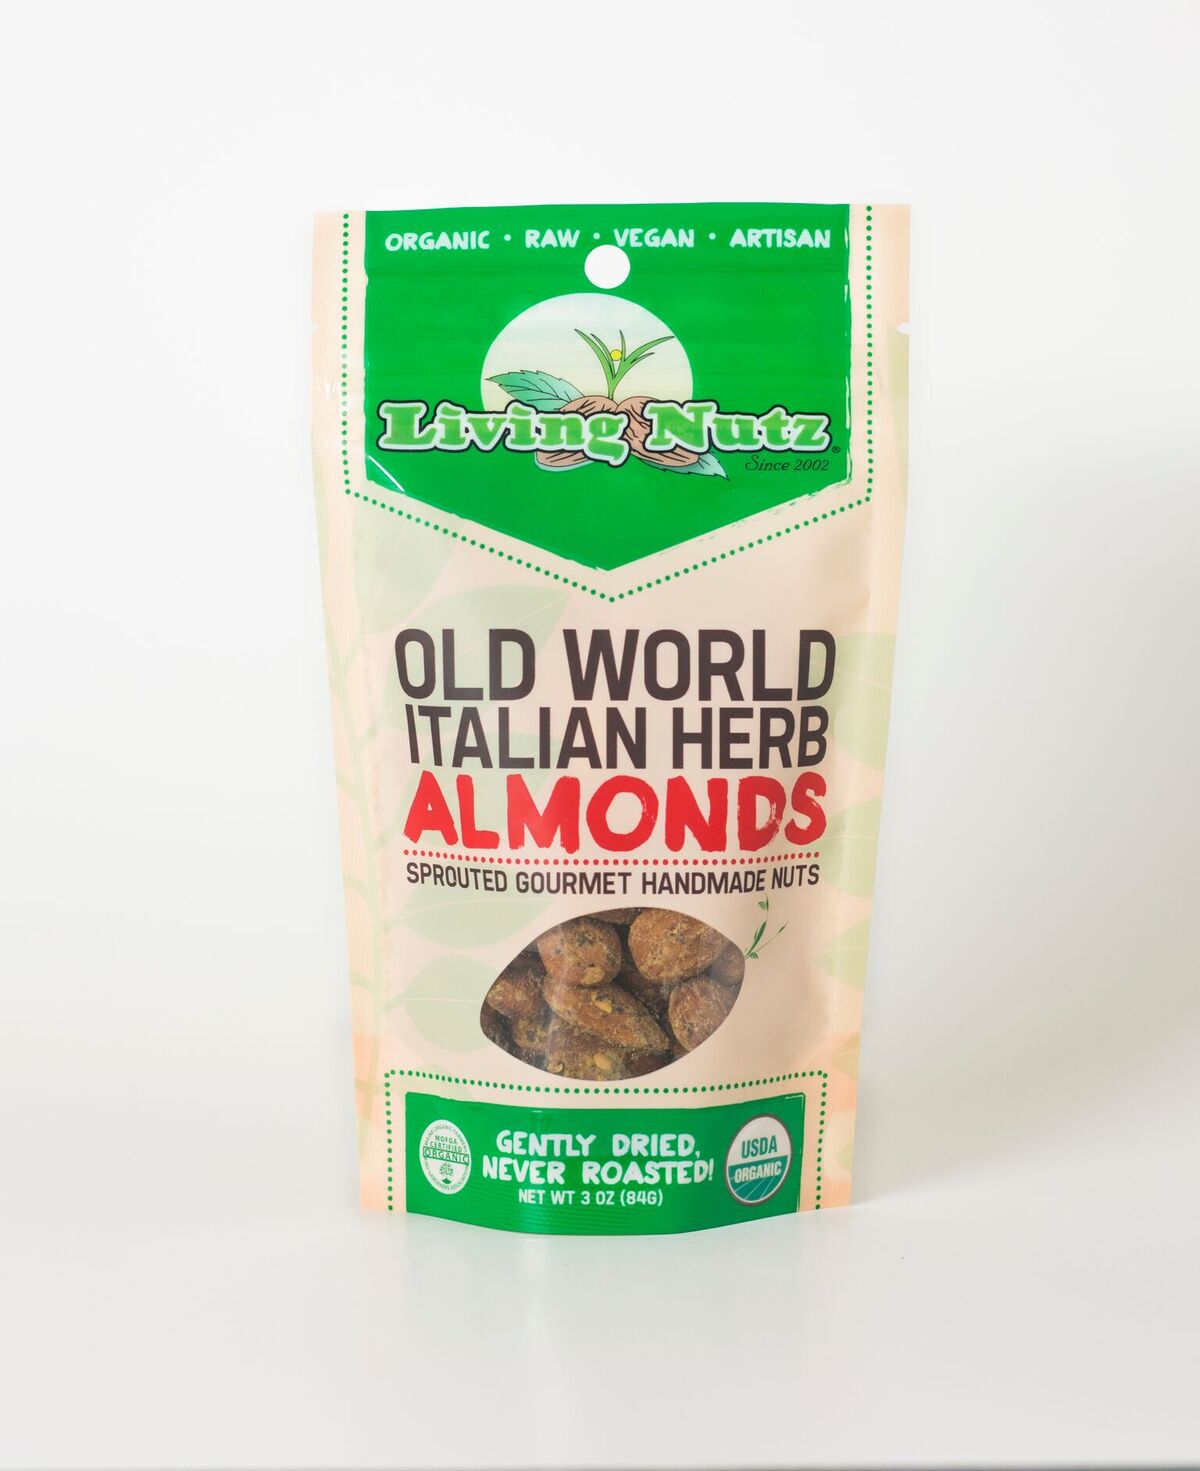 Organic raw sprouted nuts. Sprouted raw & unpasteurized almonds with Italian herb. Living Nutz. True healthy snacking.